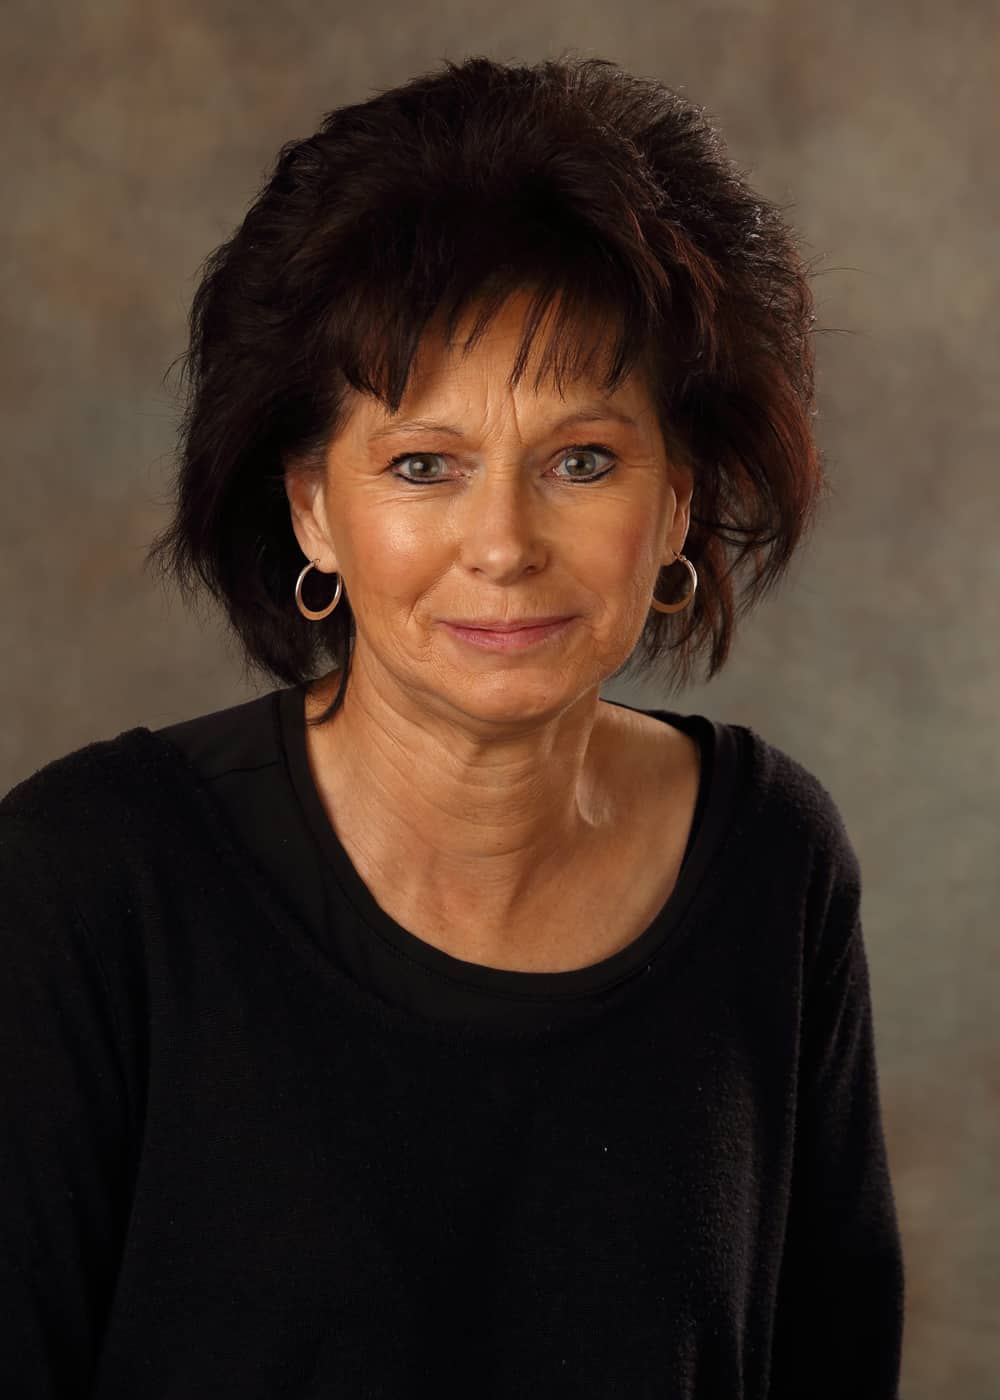 Photo of Co-Teacher Kathi Gemmell. She is a Caucasian woman with black hair and green eyes. She is wearing hoop earrings and a black shirt.